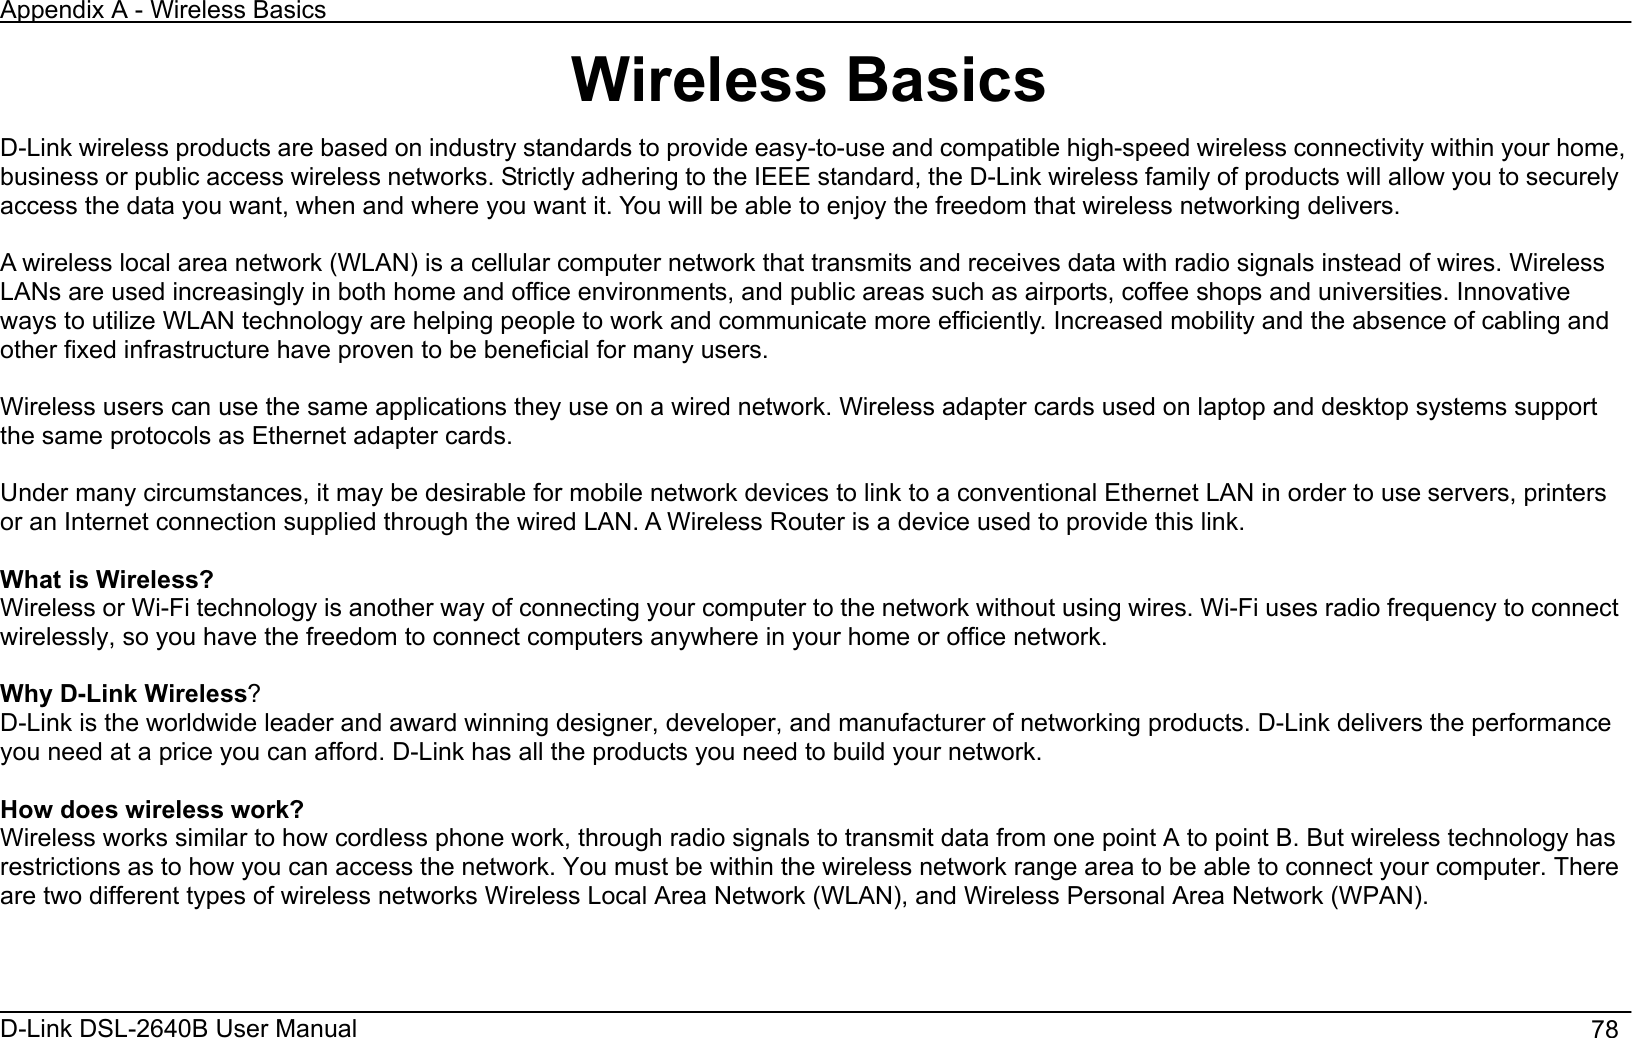 Appendix A - Wireless Basics D-Link DSL-2640B User Manual                                       78Wireless Basics D-Link wireless products are based on industry standards to provide easy-to-use and compatible high-speed wireless connectivity within your home, business or public access wireless networks. Strictly adhering to the IEEE standard, the D-Link wireless family of products will allow you to securely access the data you want, when and where you want it. You will be able to enjoy the freedom that wireless networking delivers. A wireless local area network (WLAN) is a cellular computer network that transmits and receives data with radio signals instead of wires. Wireless LANs are used increasingly in both home and office environments, and public areas such as airports, coffee shops and universities. Innovative ways to utilize WLAN technology are helping people to work and communicate more efficiently. Increased mobility and the absence of cabling and other fixed infrastructure have proven to be beneficial for many users. Wireless users can use the same applications they use on a wired network. Wireless adapter cards used on laptop and desktop systems support the same protocols as Ethernet adapter cards.   Under many circumstances, it may be desirable for mobile network devices to link to a conventional Ethernet LAN in order to use servers, printers or an Internet connection supplied through the wired LAN. A Wireless Router is a device used to provide this link. What is Wireless?   Wireless or Wi-Fi technology is another way of connecting your computer to the network without using wires. Wi-Fi uses radio frequency to connect wirelessly, so you have the freedom to connect computers anywhere in your home or office network. Why D-Link Wireless?D-Link is the worldwide leader and award winning designer, developer, and manufacturer of networking products. D-Link delivers the performance you need at a price you can afford. D-Link has all the products you need to build your network. How does wireless work? Wireless works similar to how cordless phone work, through radio signals to transmit data from one point A to point B. But wireless technology has restrictions as to how you can access the network. You must be within the wireless network range area to be able to connect your computer. There are two different types of wireless networks Wireless Local Area Network (WLAN), and Wireless Personal Area Network (WPAN). 